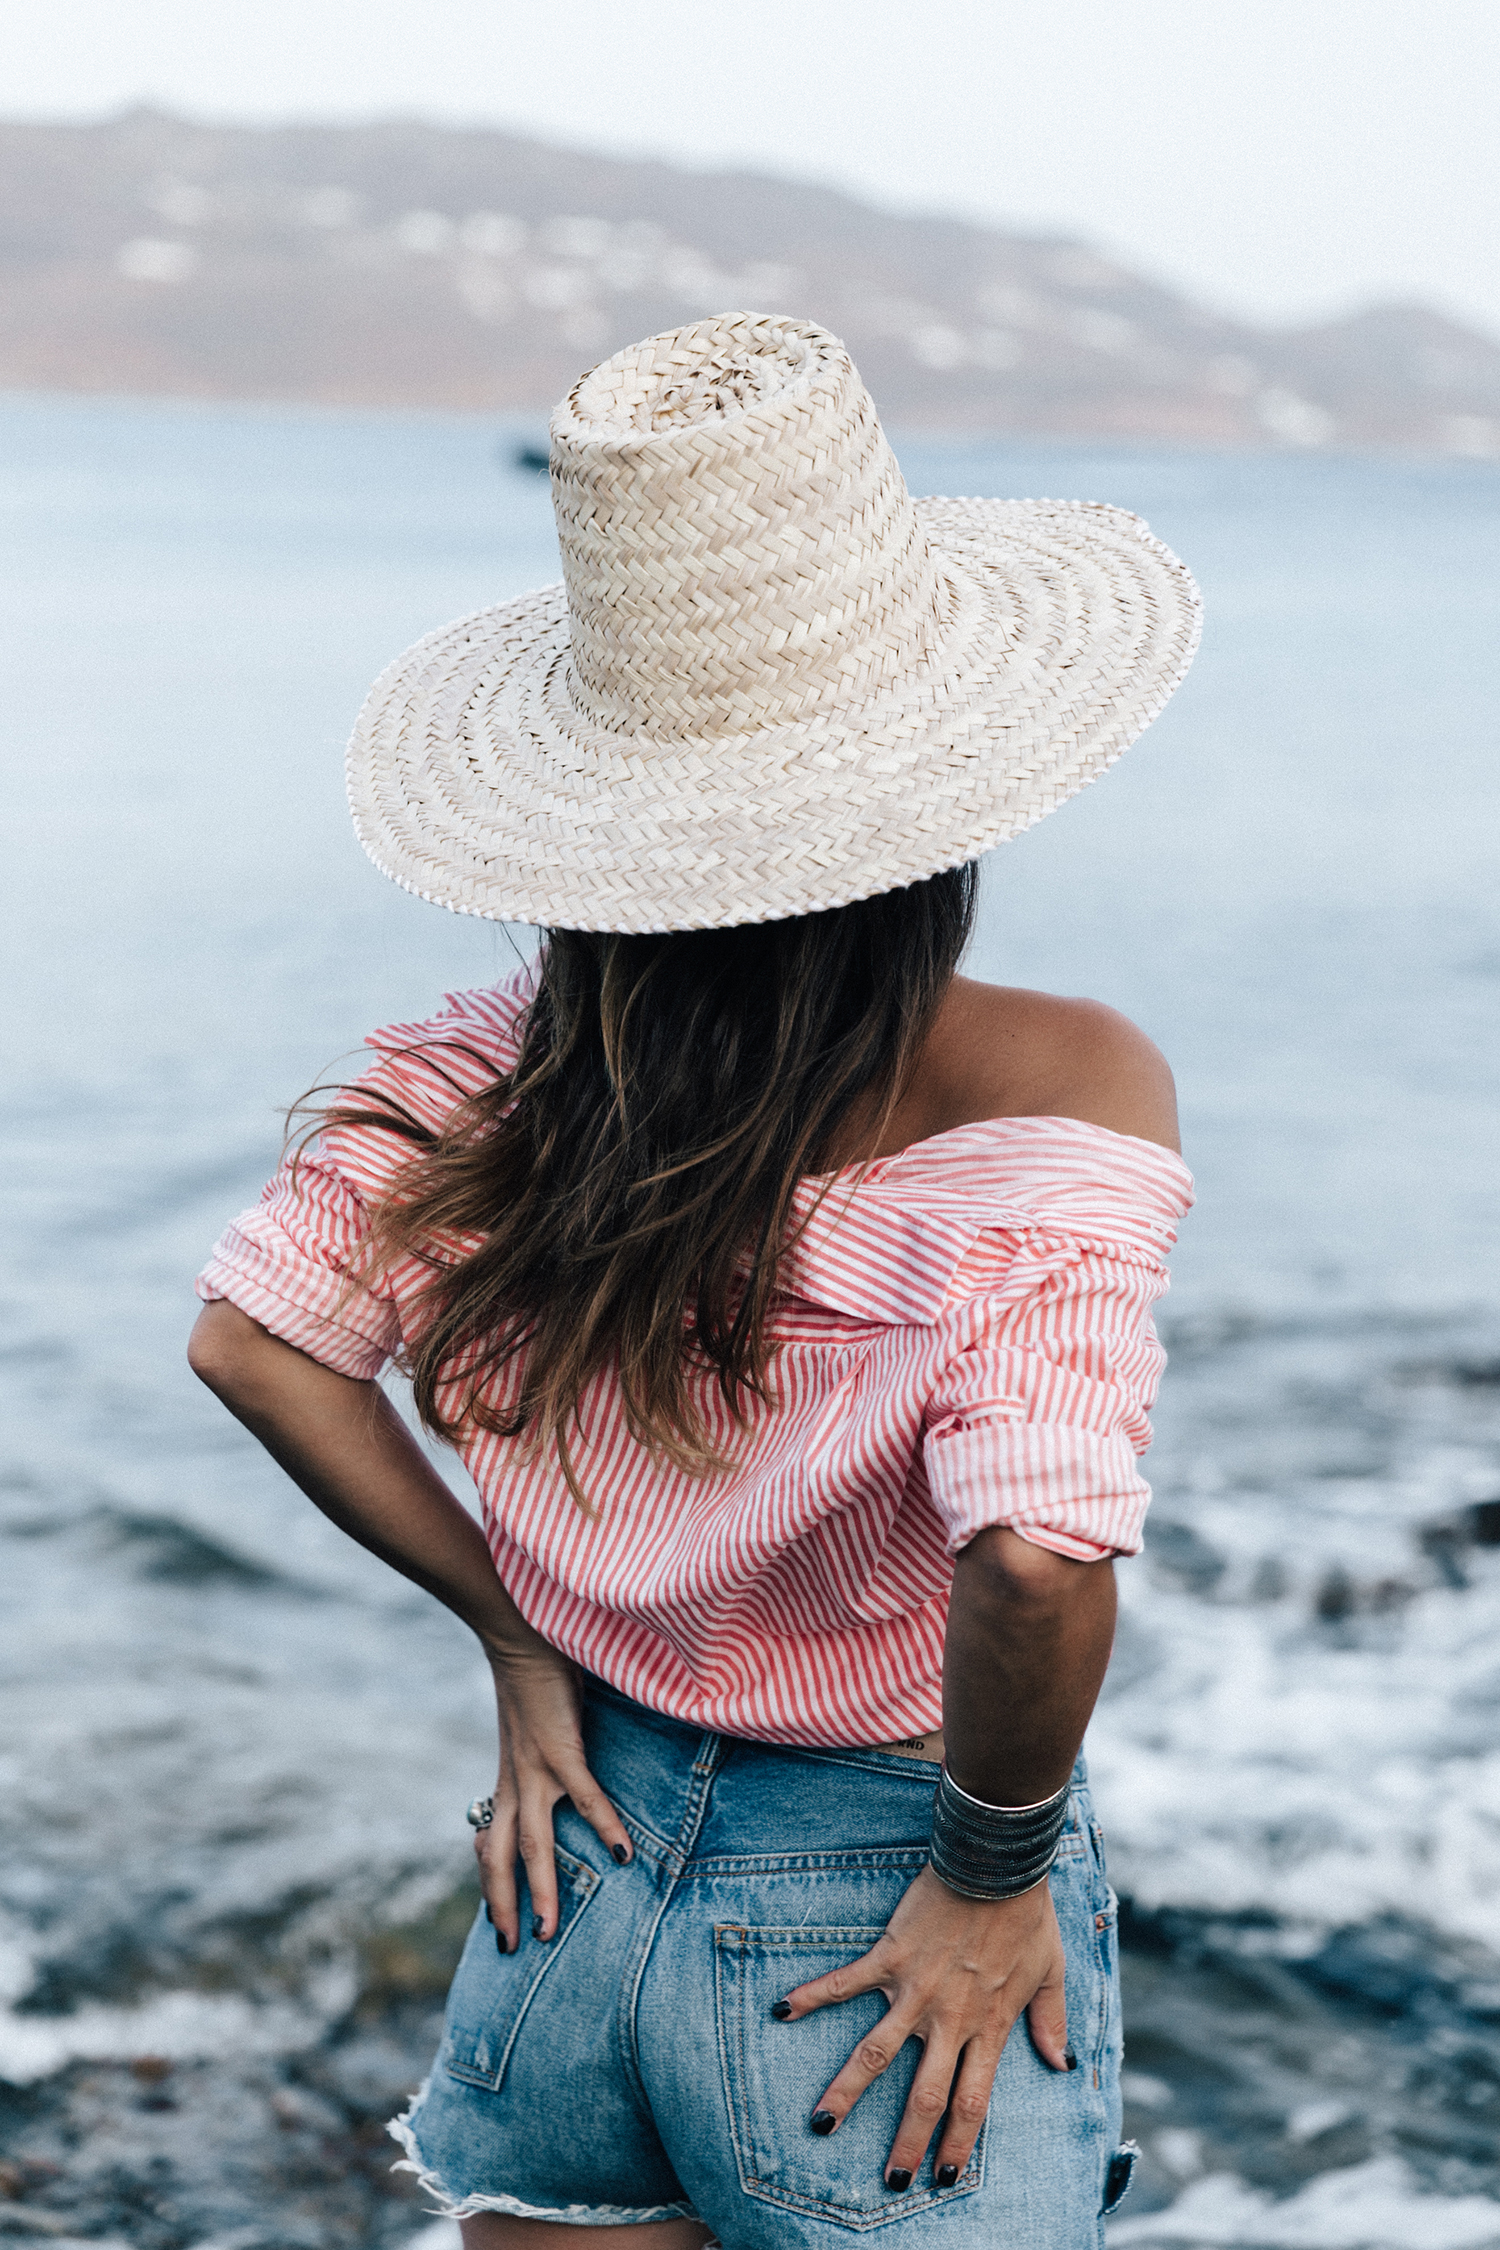 Mykonos-Collage_on_The_Road-Striped_Shirt-GRLFRND_Shorts-Straw_Hat-Denim-Espadrilles-Soludos_Escapes-Greece-Outfit-76